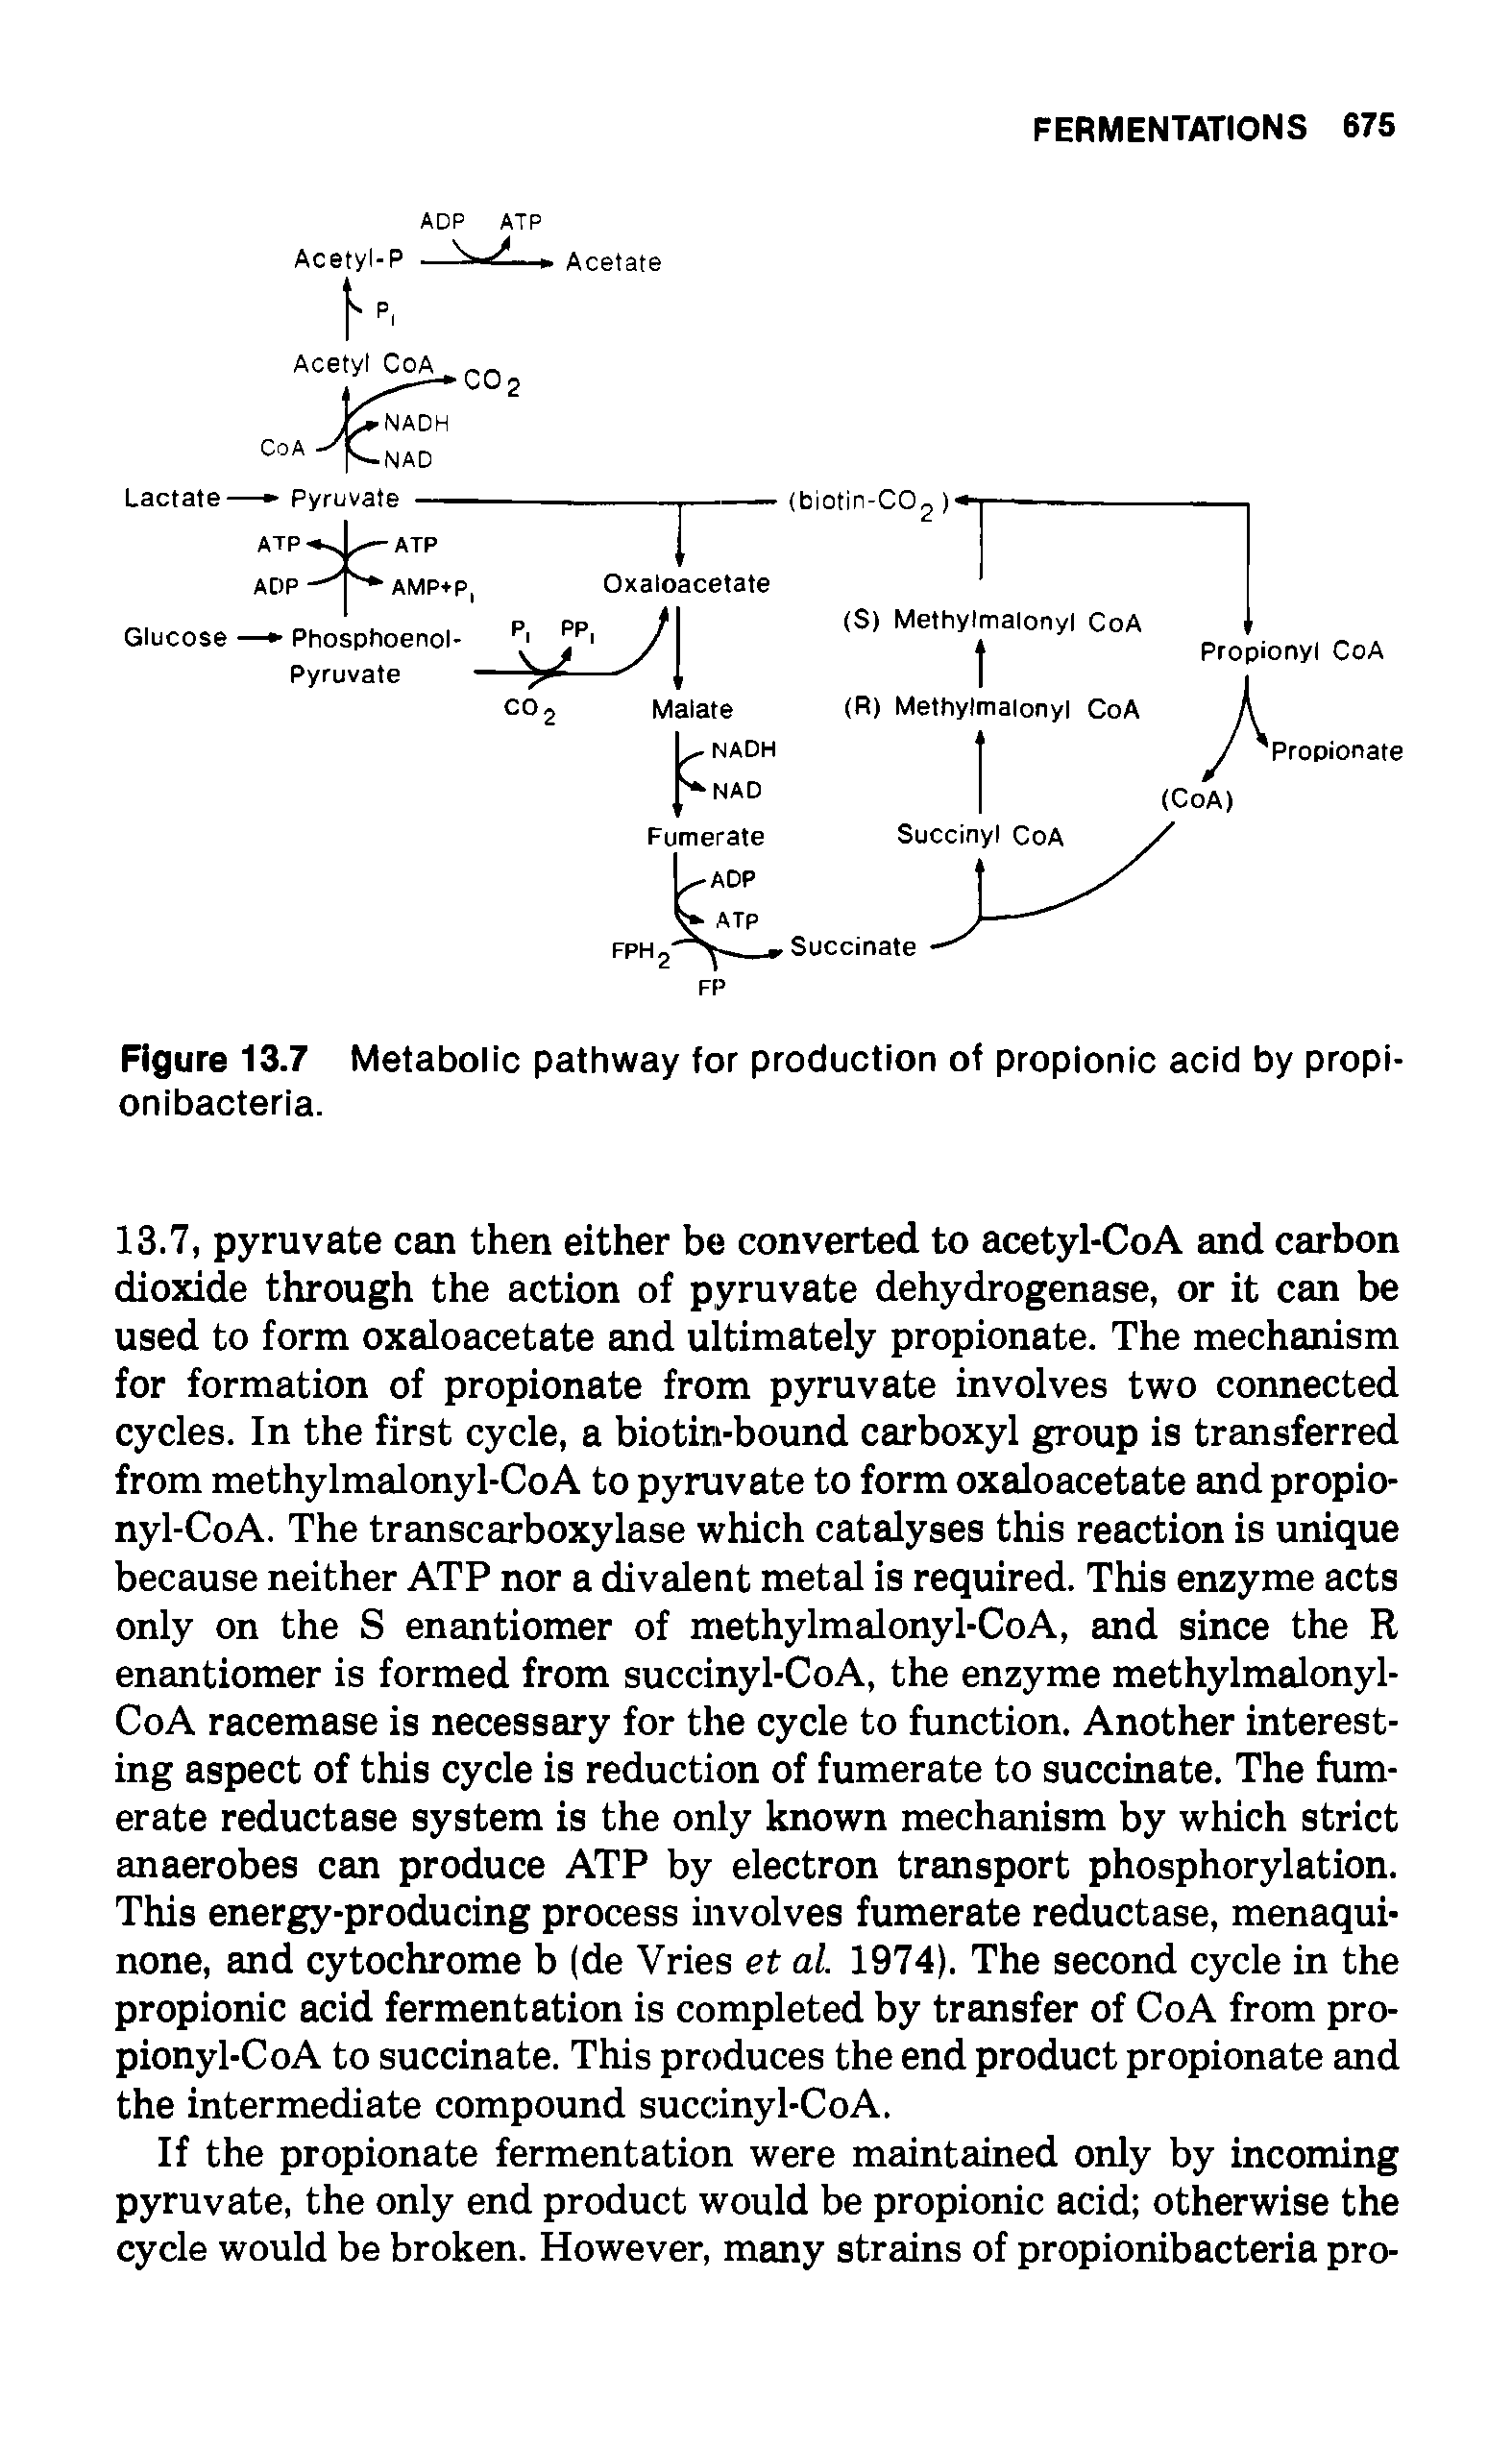 Figure 13.7 Metabolic pathway for production of propionic acid by propi-onibacteria.